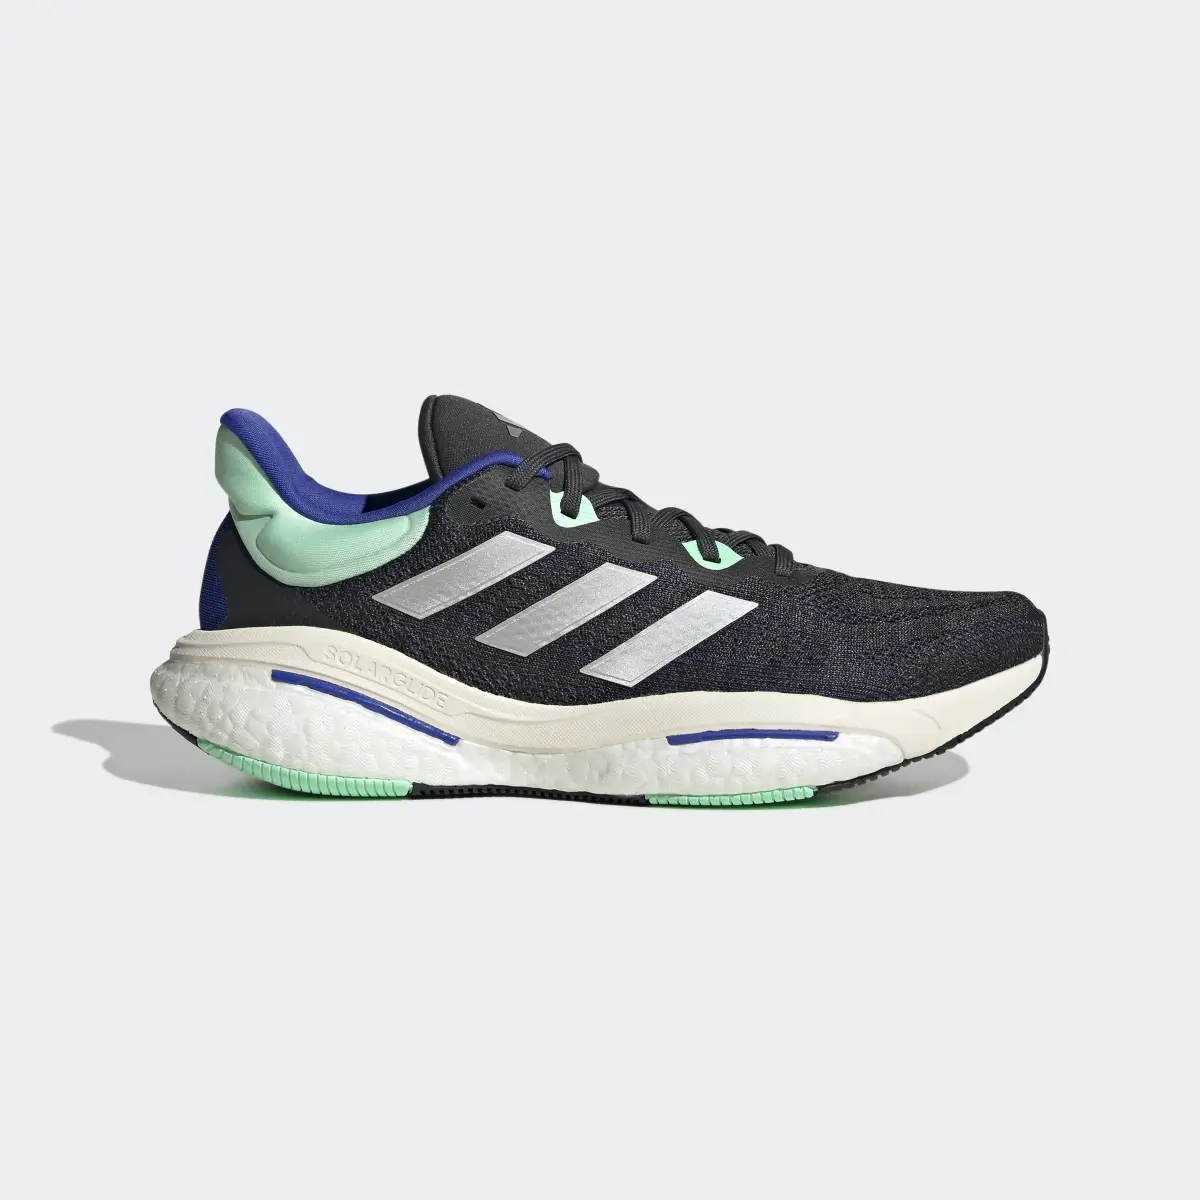 Adidas Solarglide 6 Running Shoes. 2